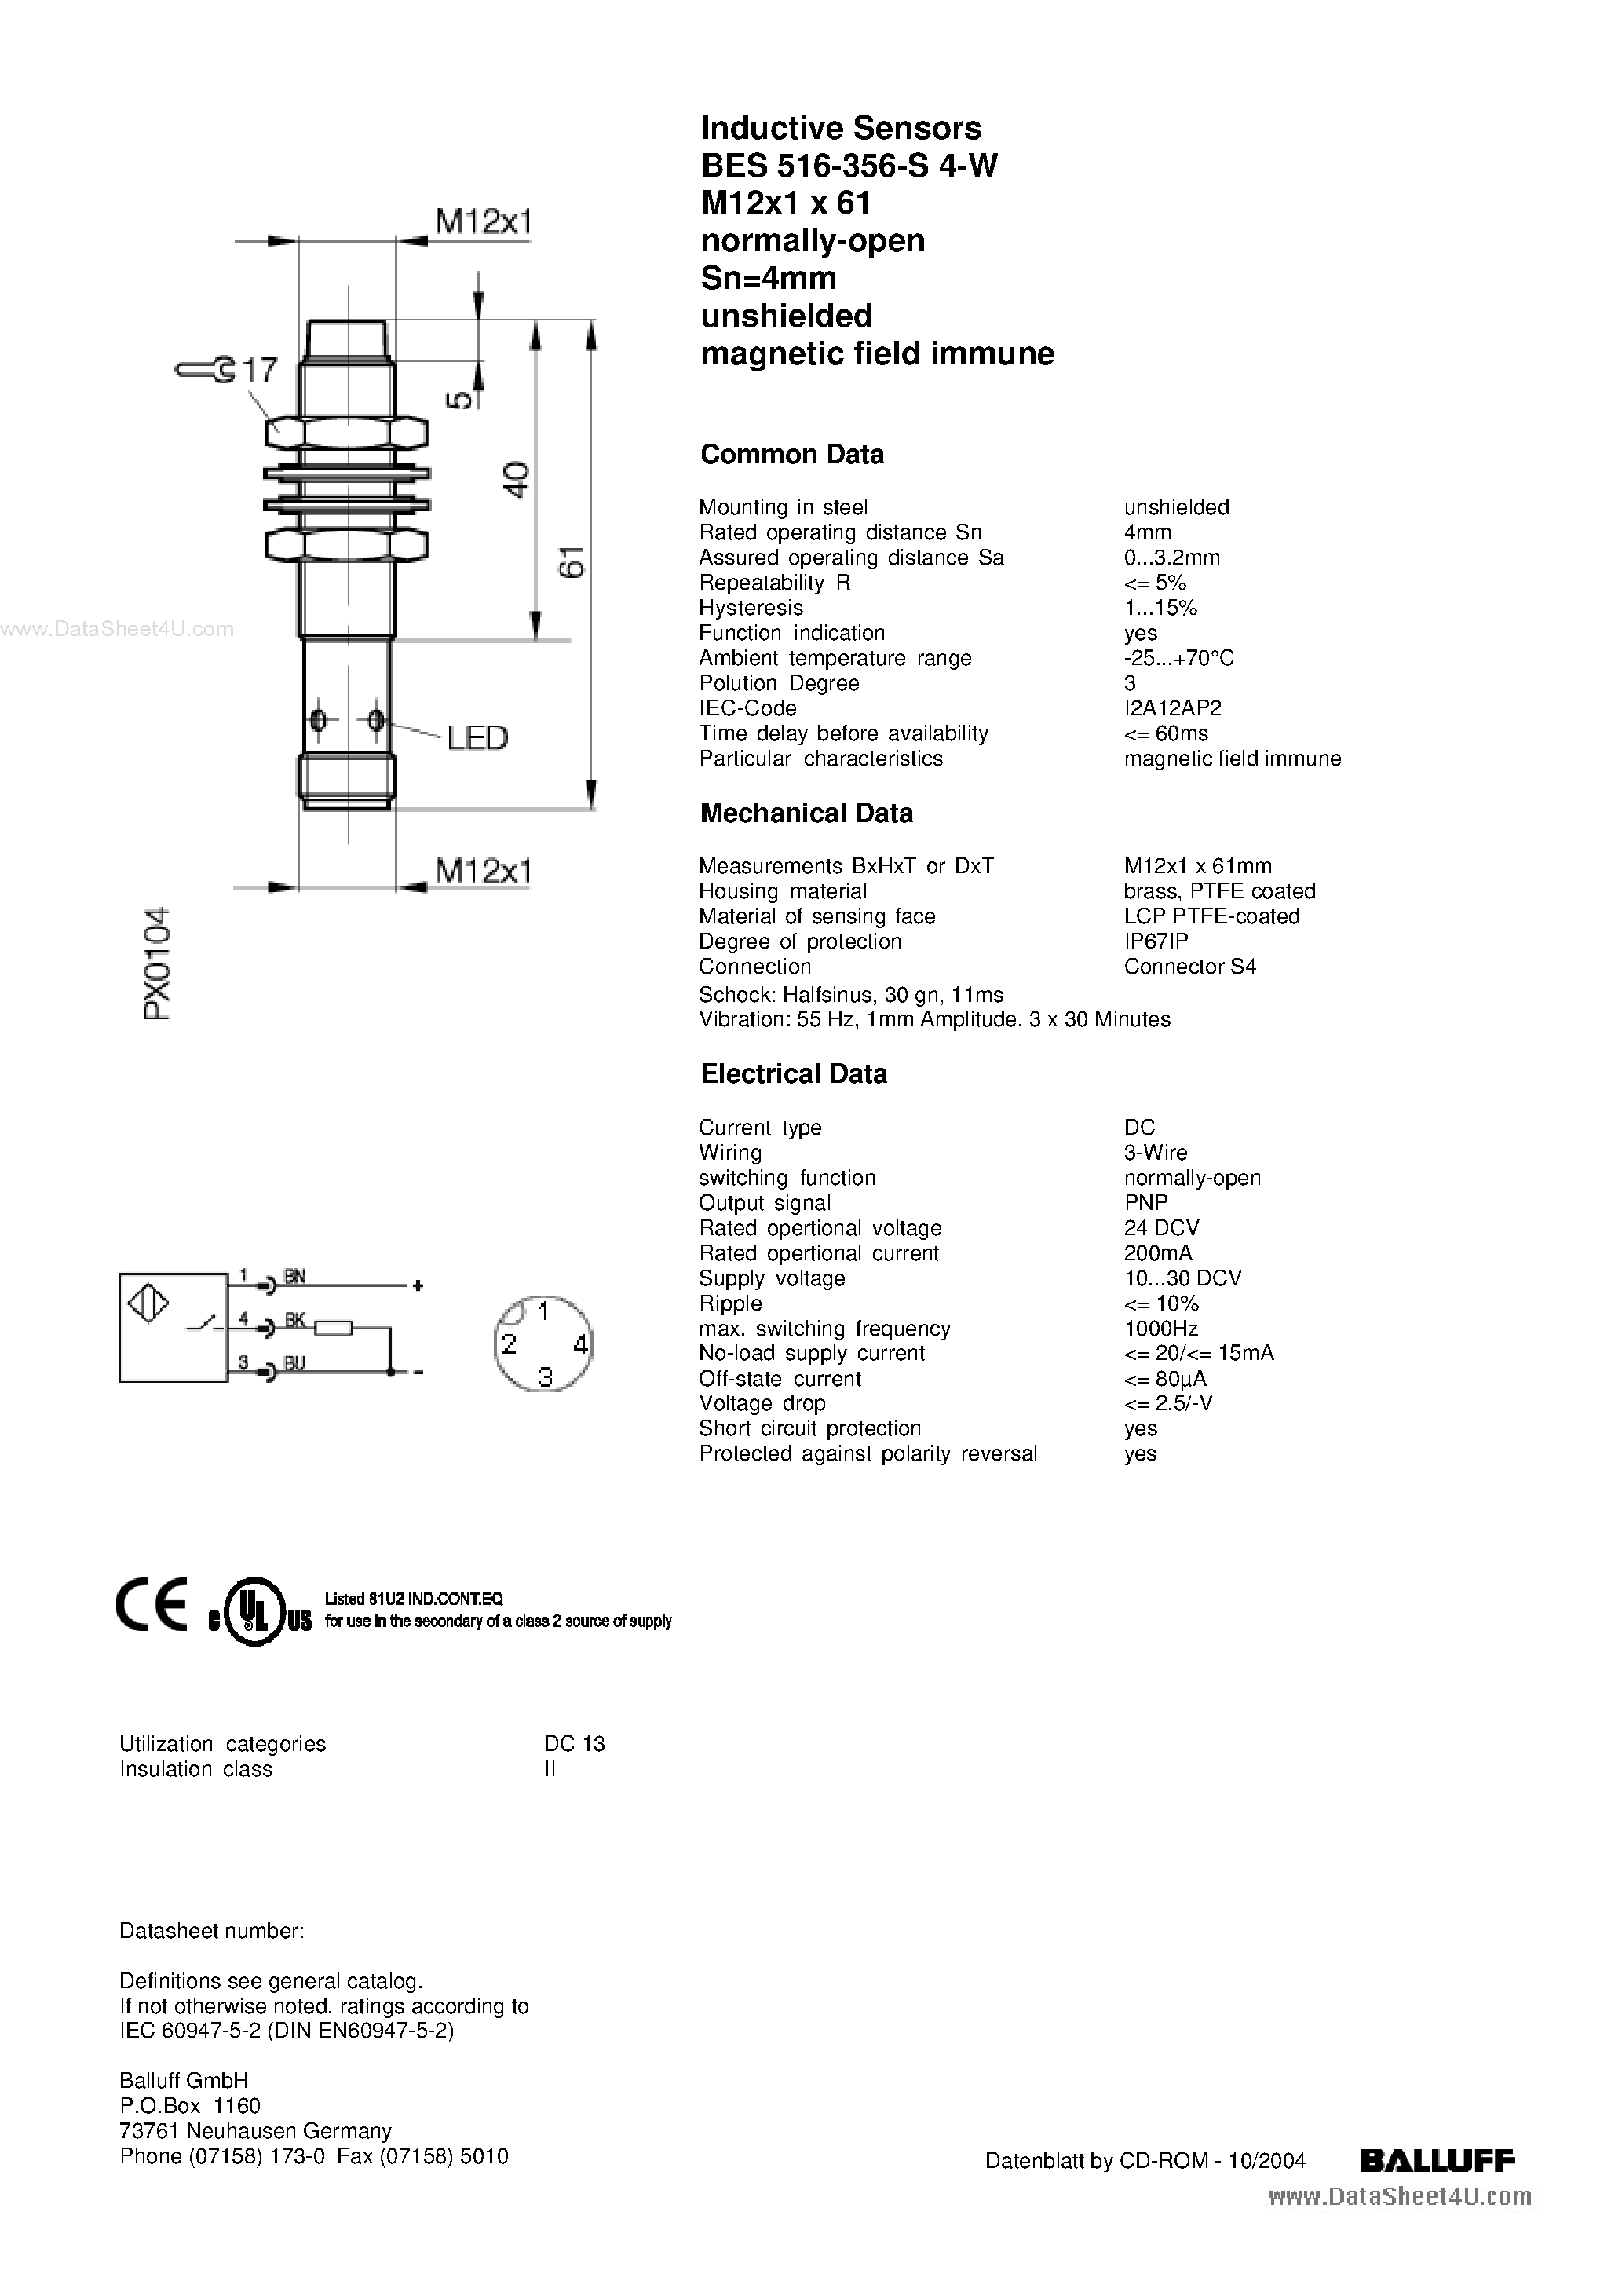 Datasheet BES-516-356-S4-W - Inductive Sensors page 1